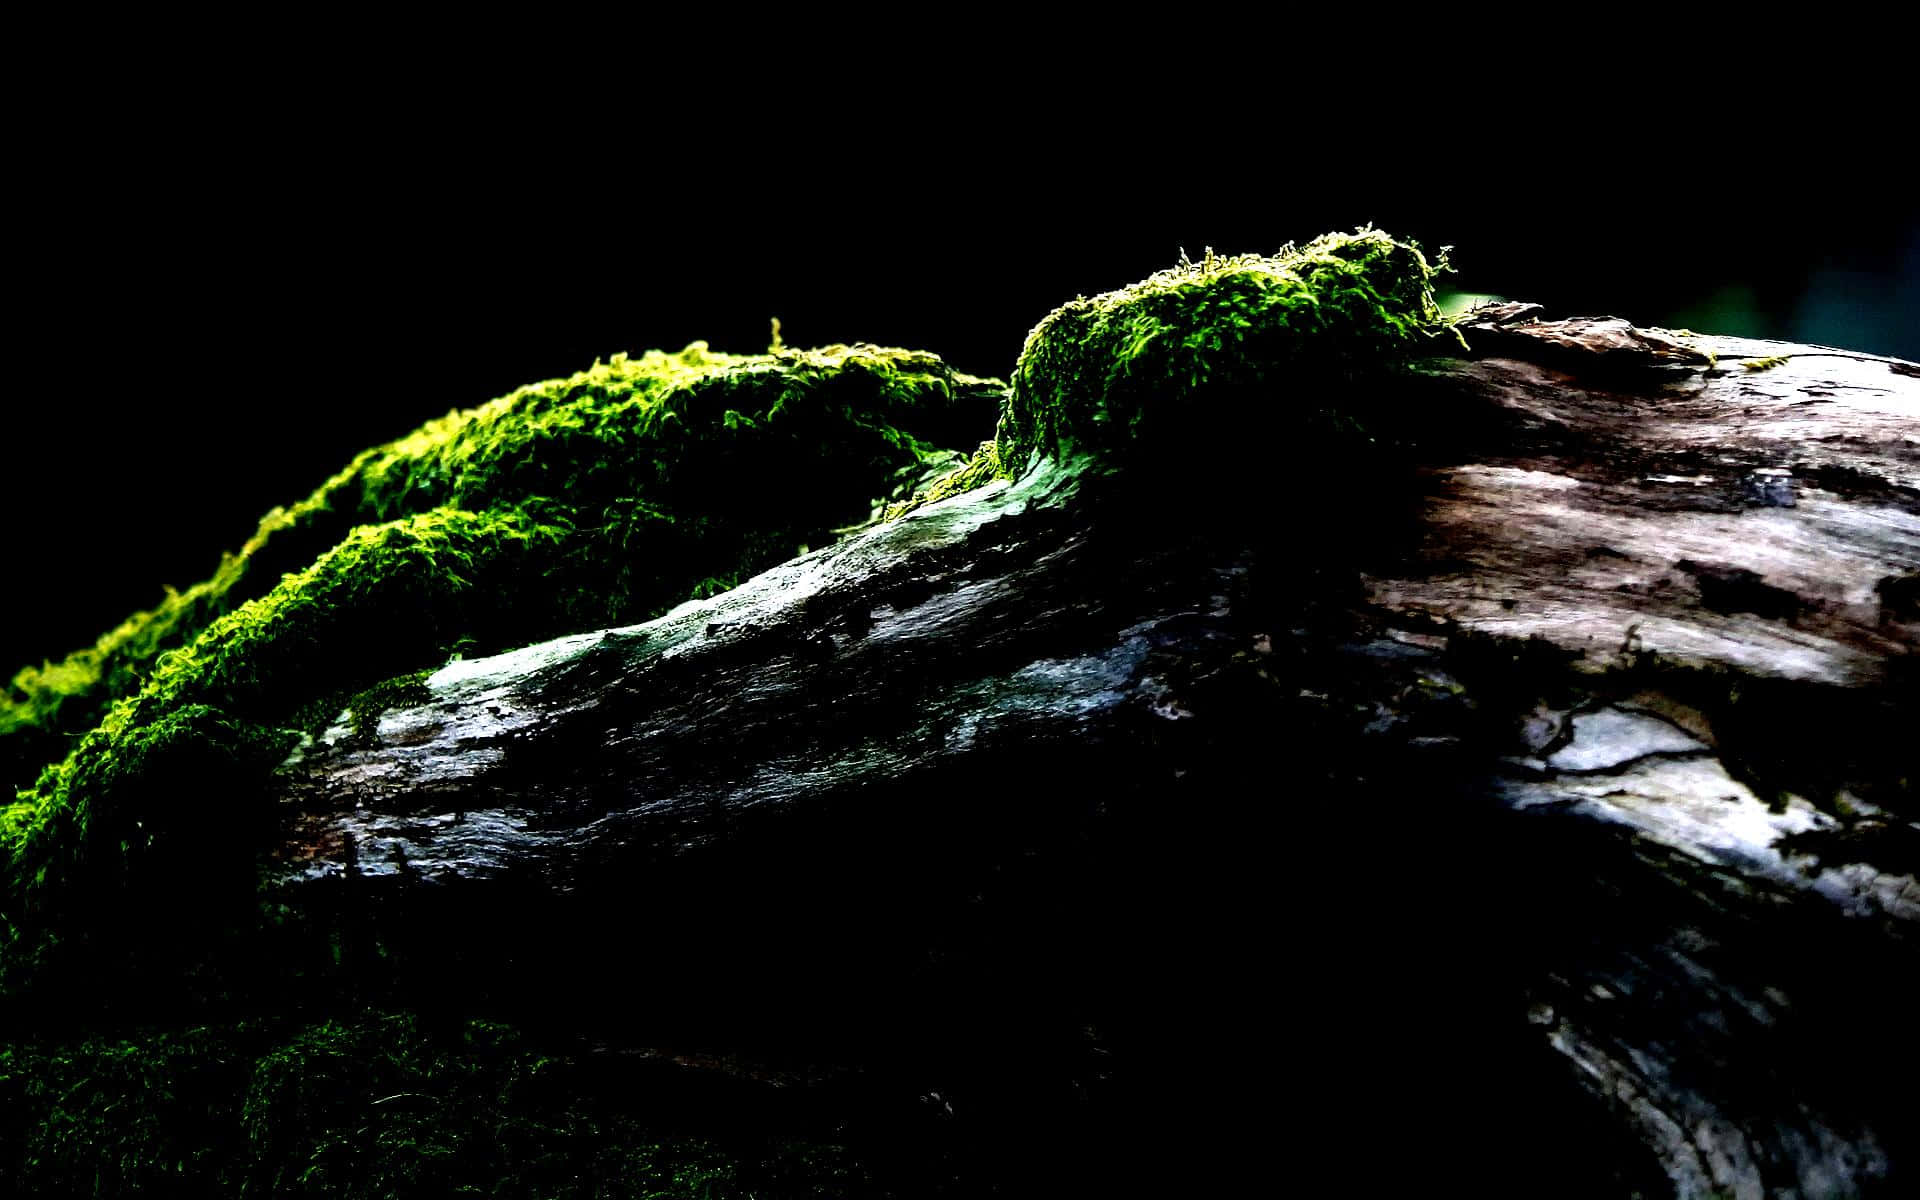 Wood Covered In Moss Oled Monitor Wallpaper